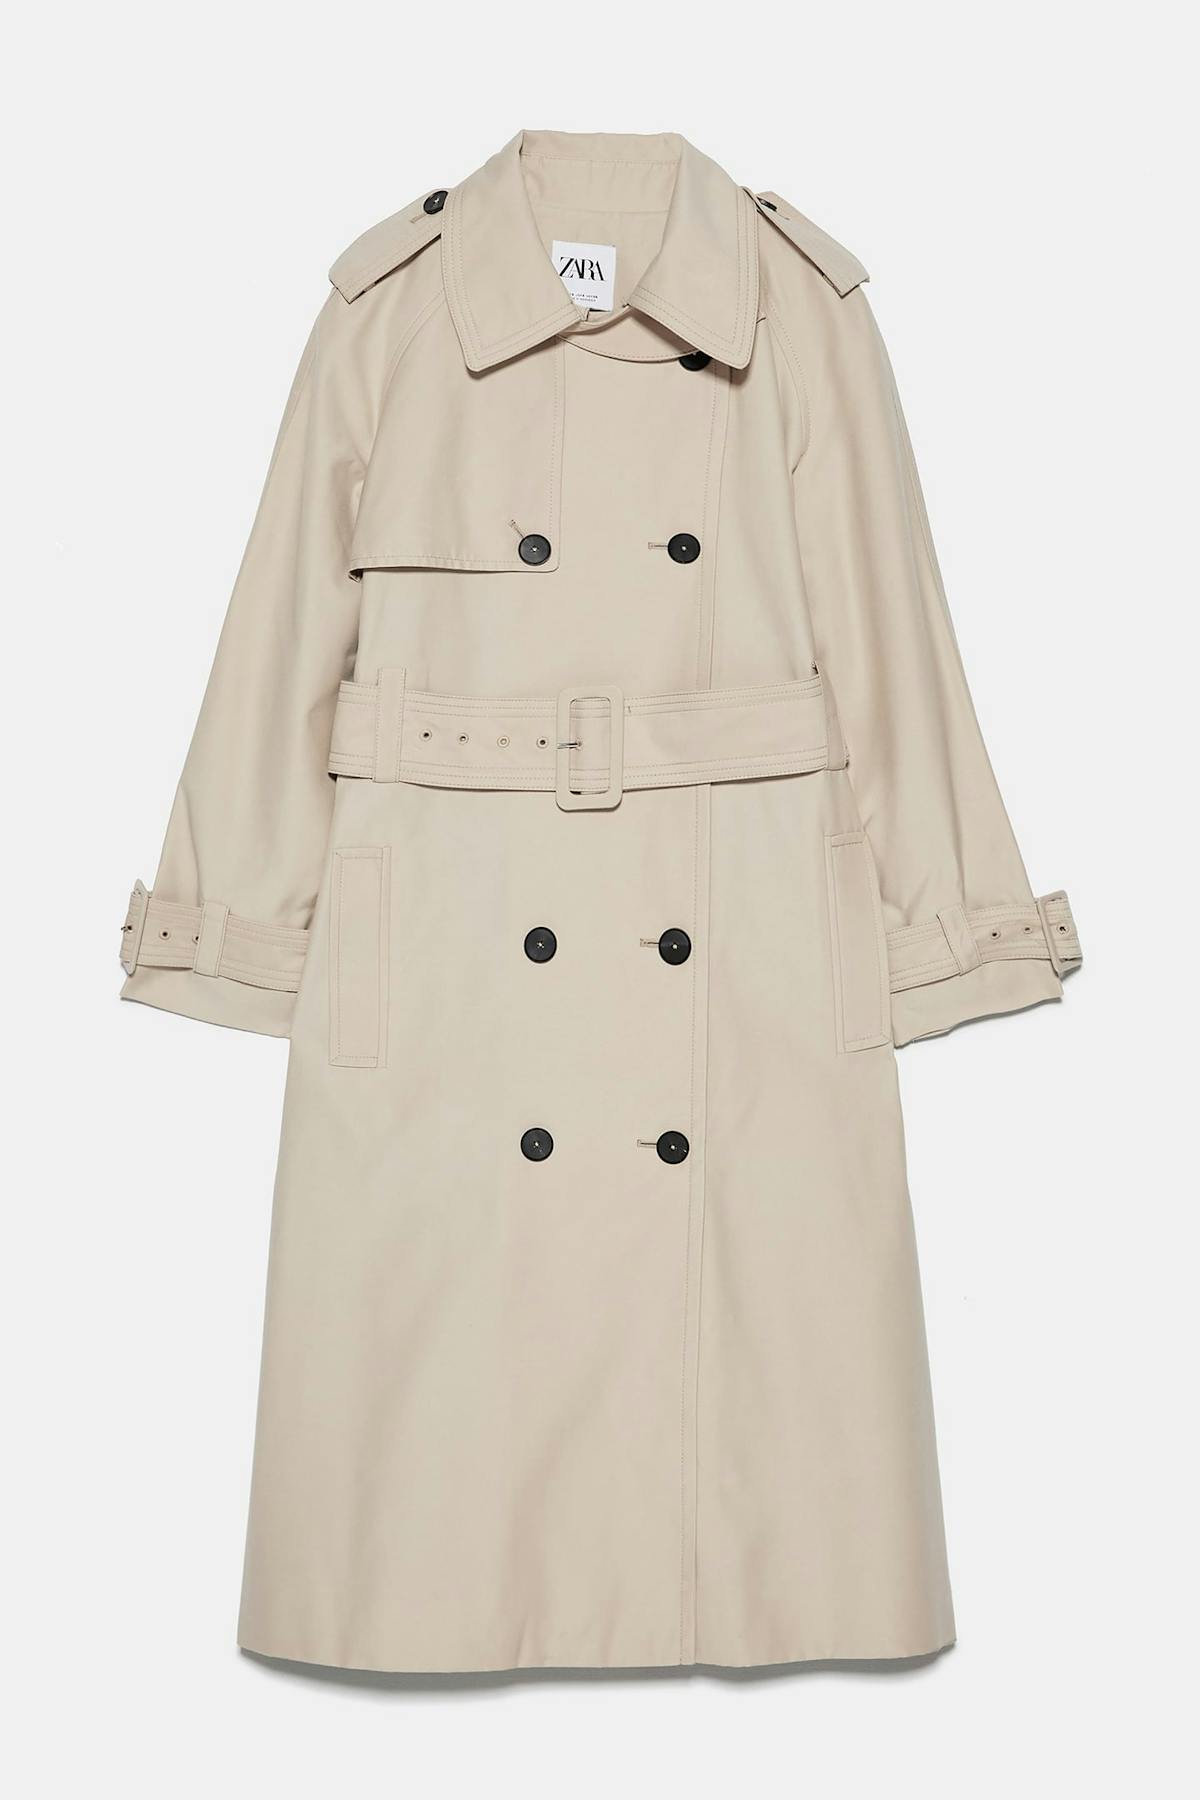 Best trench coats for spring 2020